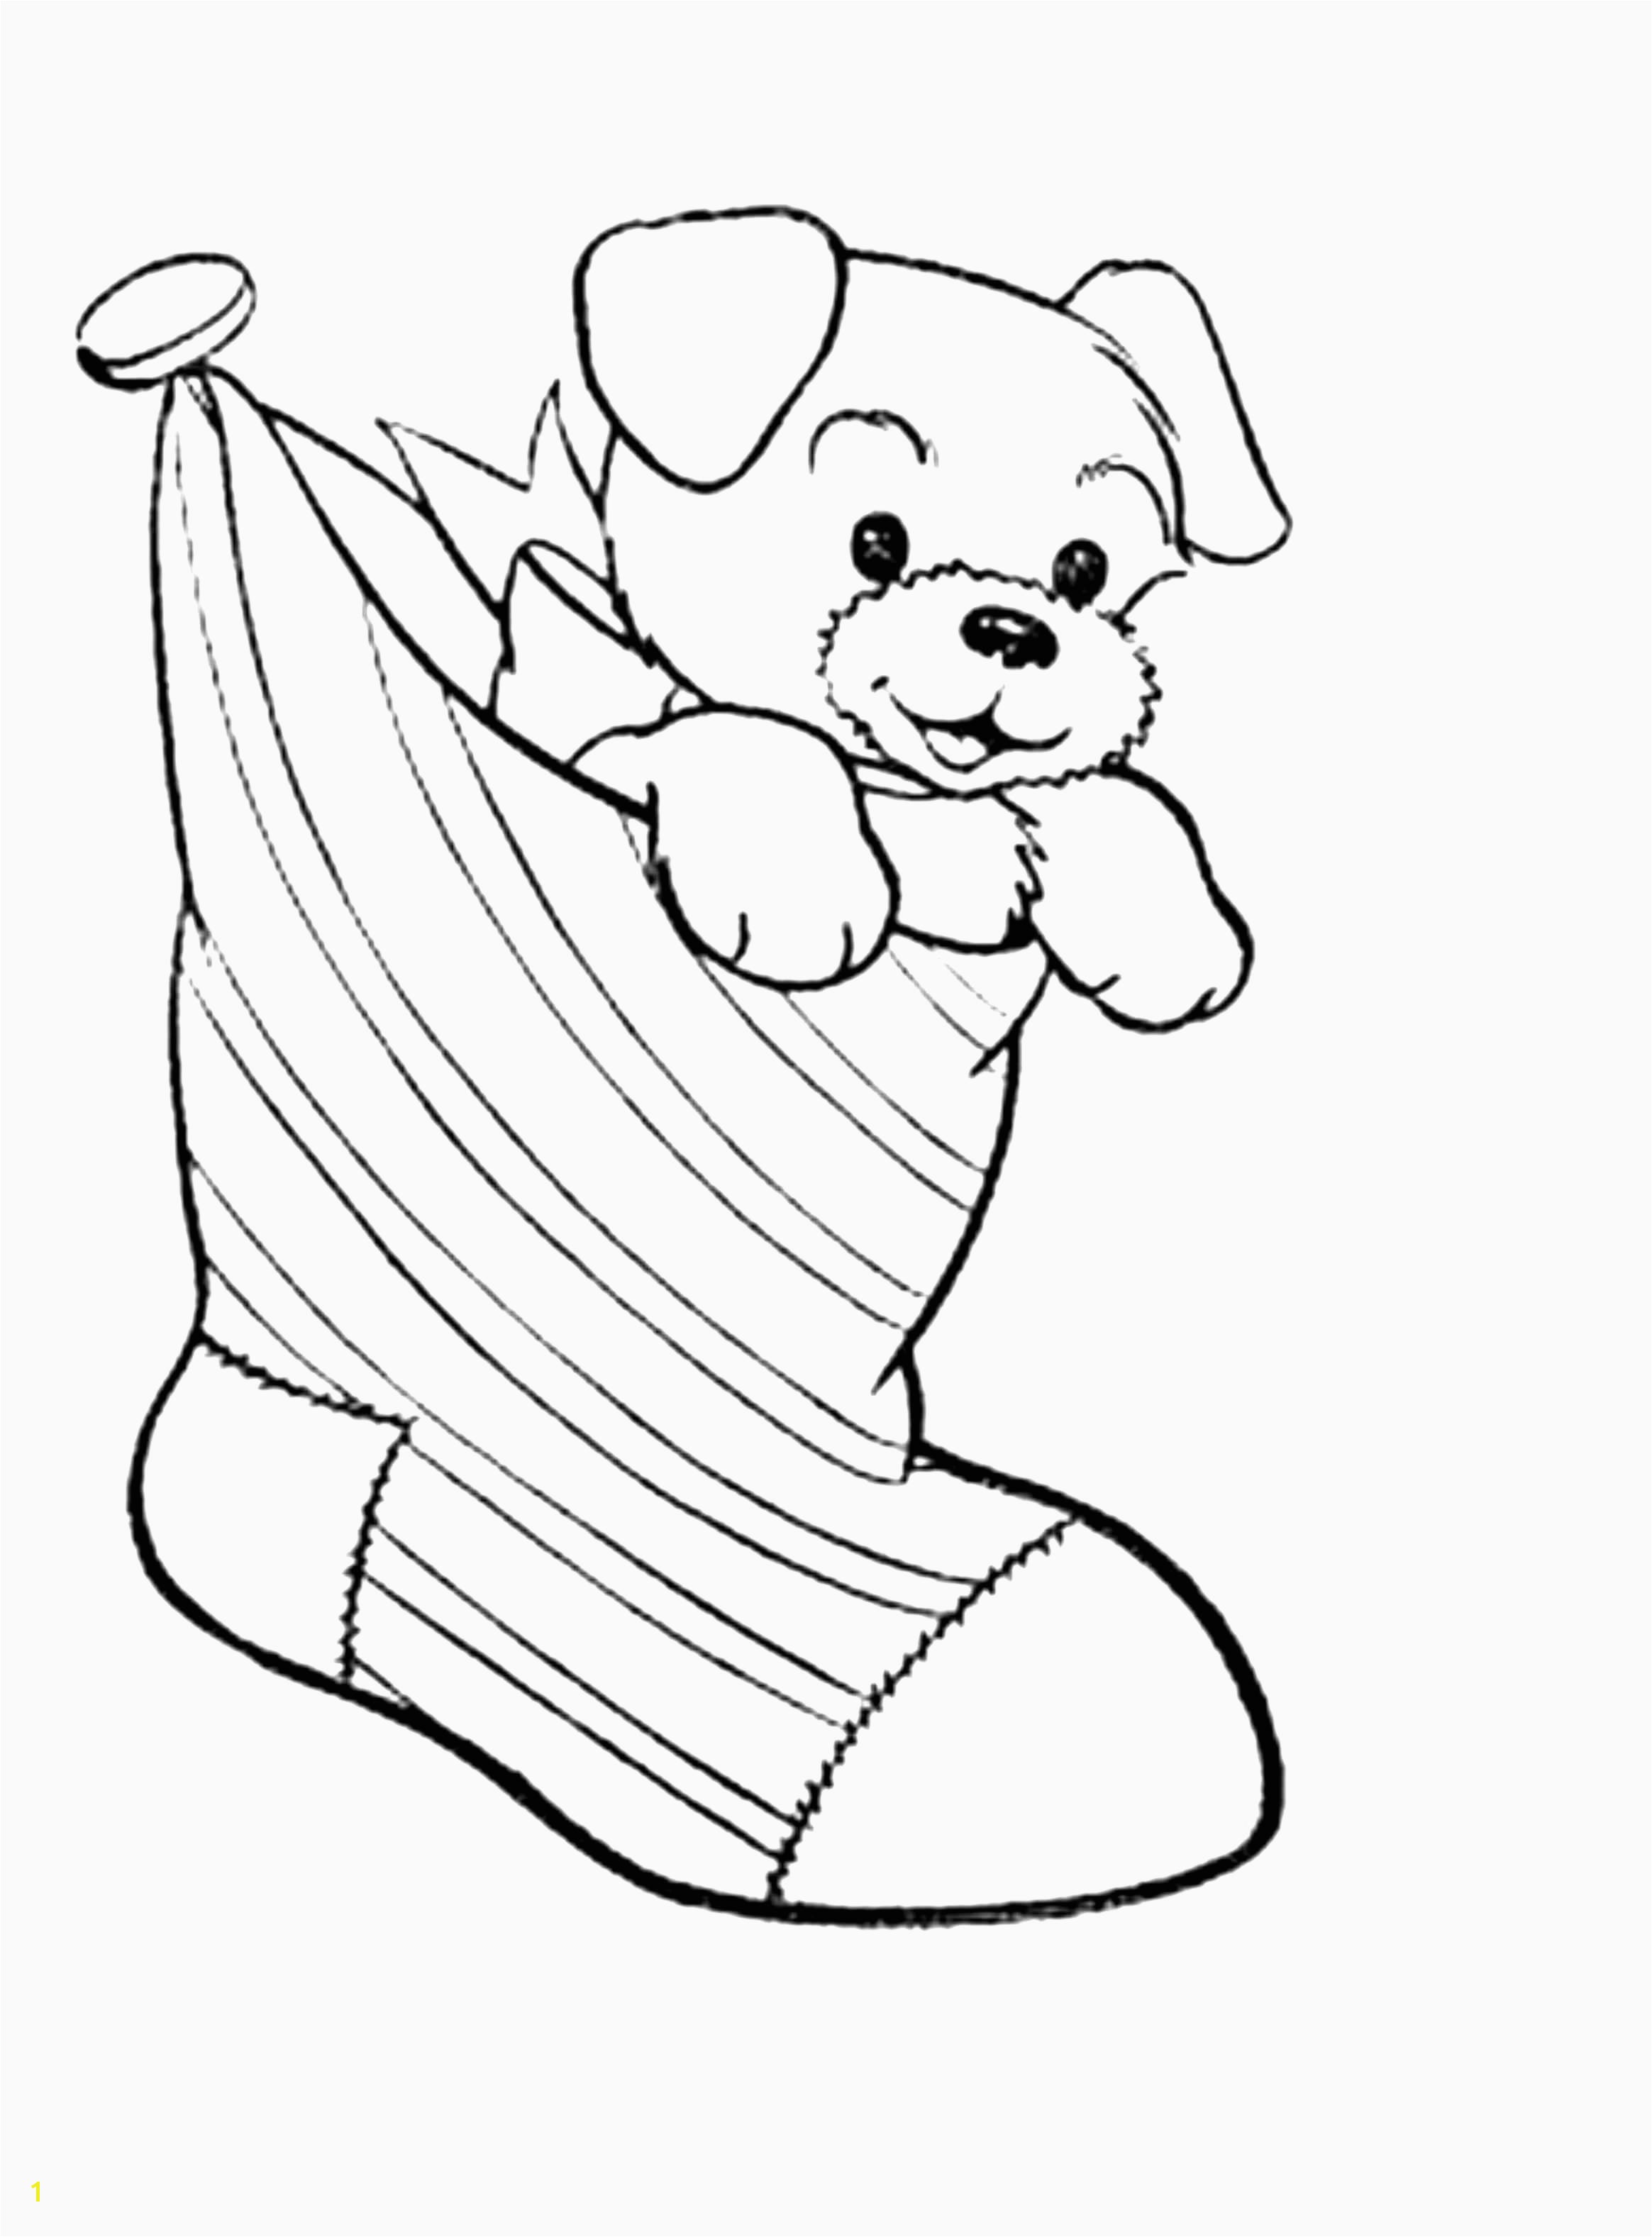 Puppy Christmas Coloring Pages With Cartoon Page For Kids Animal Best And Awesome Od Dog Free